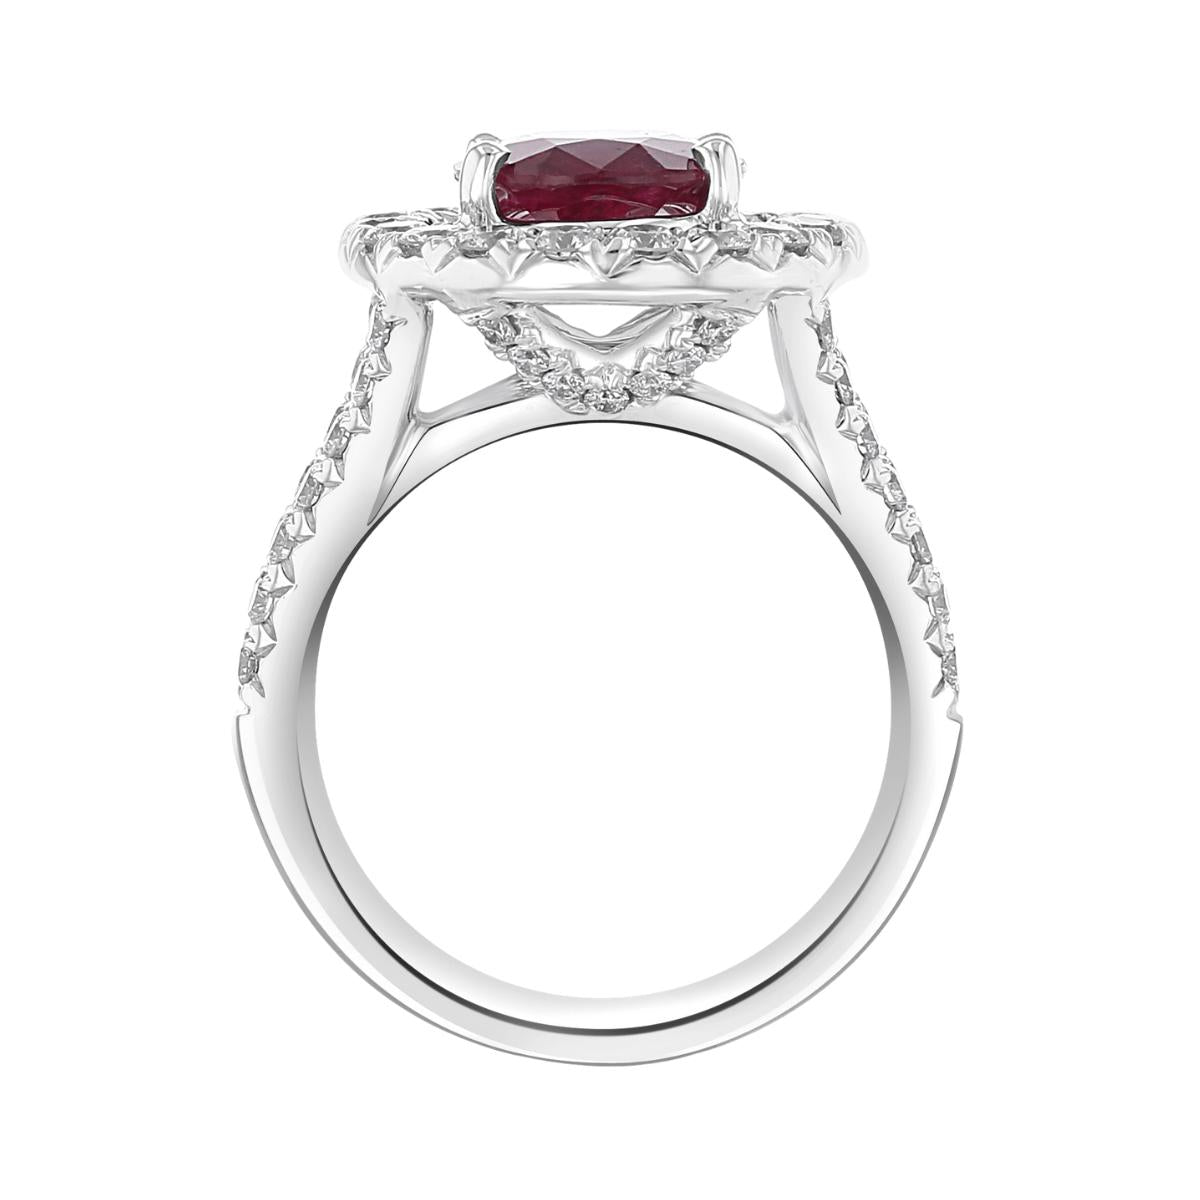 18KT GOLD 3.03 CT RUBY & 1.65 CTW DIAMOND OVAL HALO RING 4,4.5,5,5.5,6,6.5,7,7.5,8,8.5,9